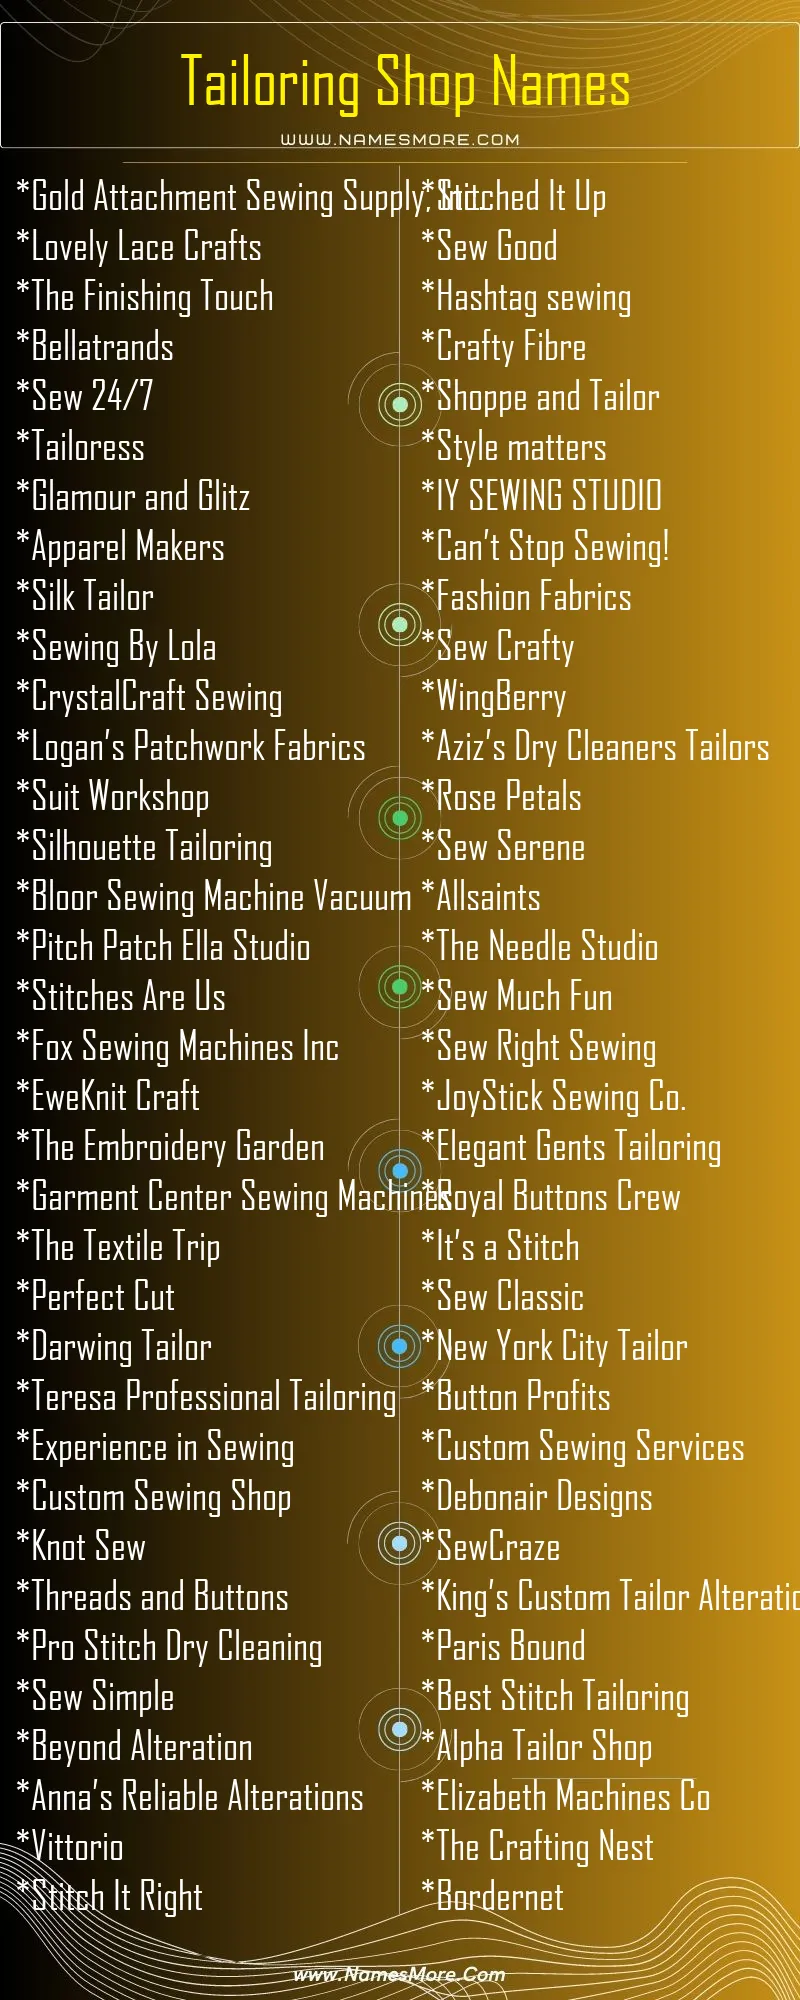 Tailoring Shop Names List Infographic